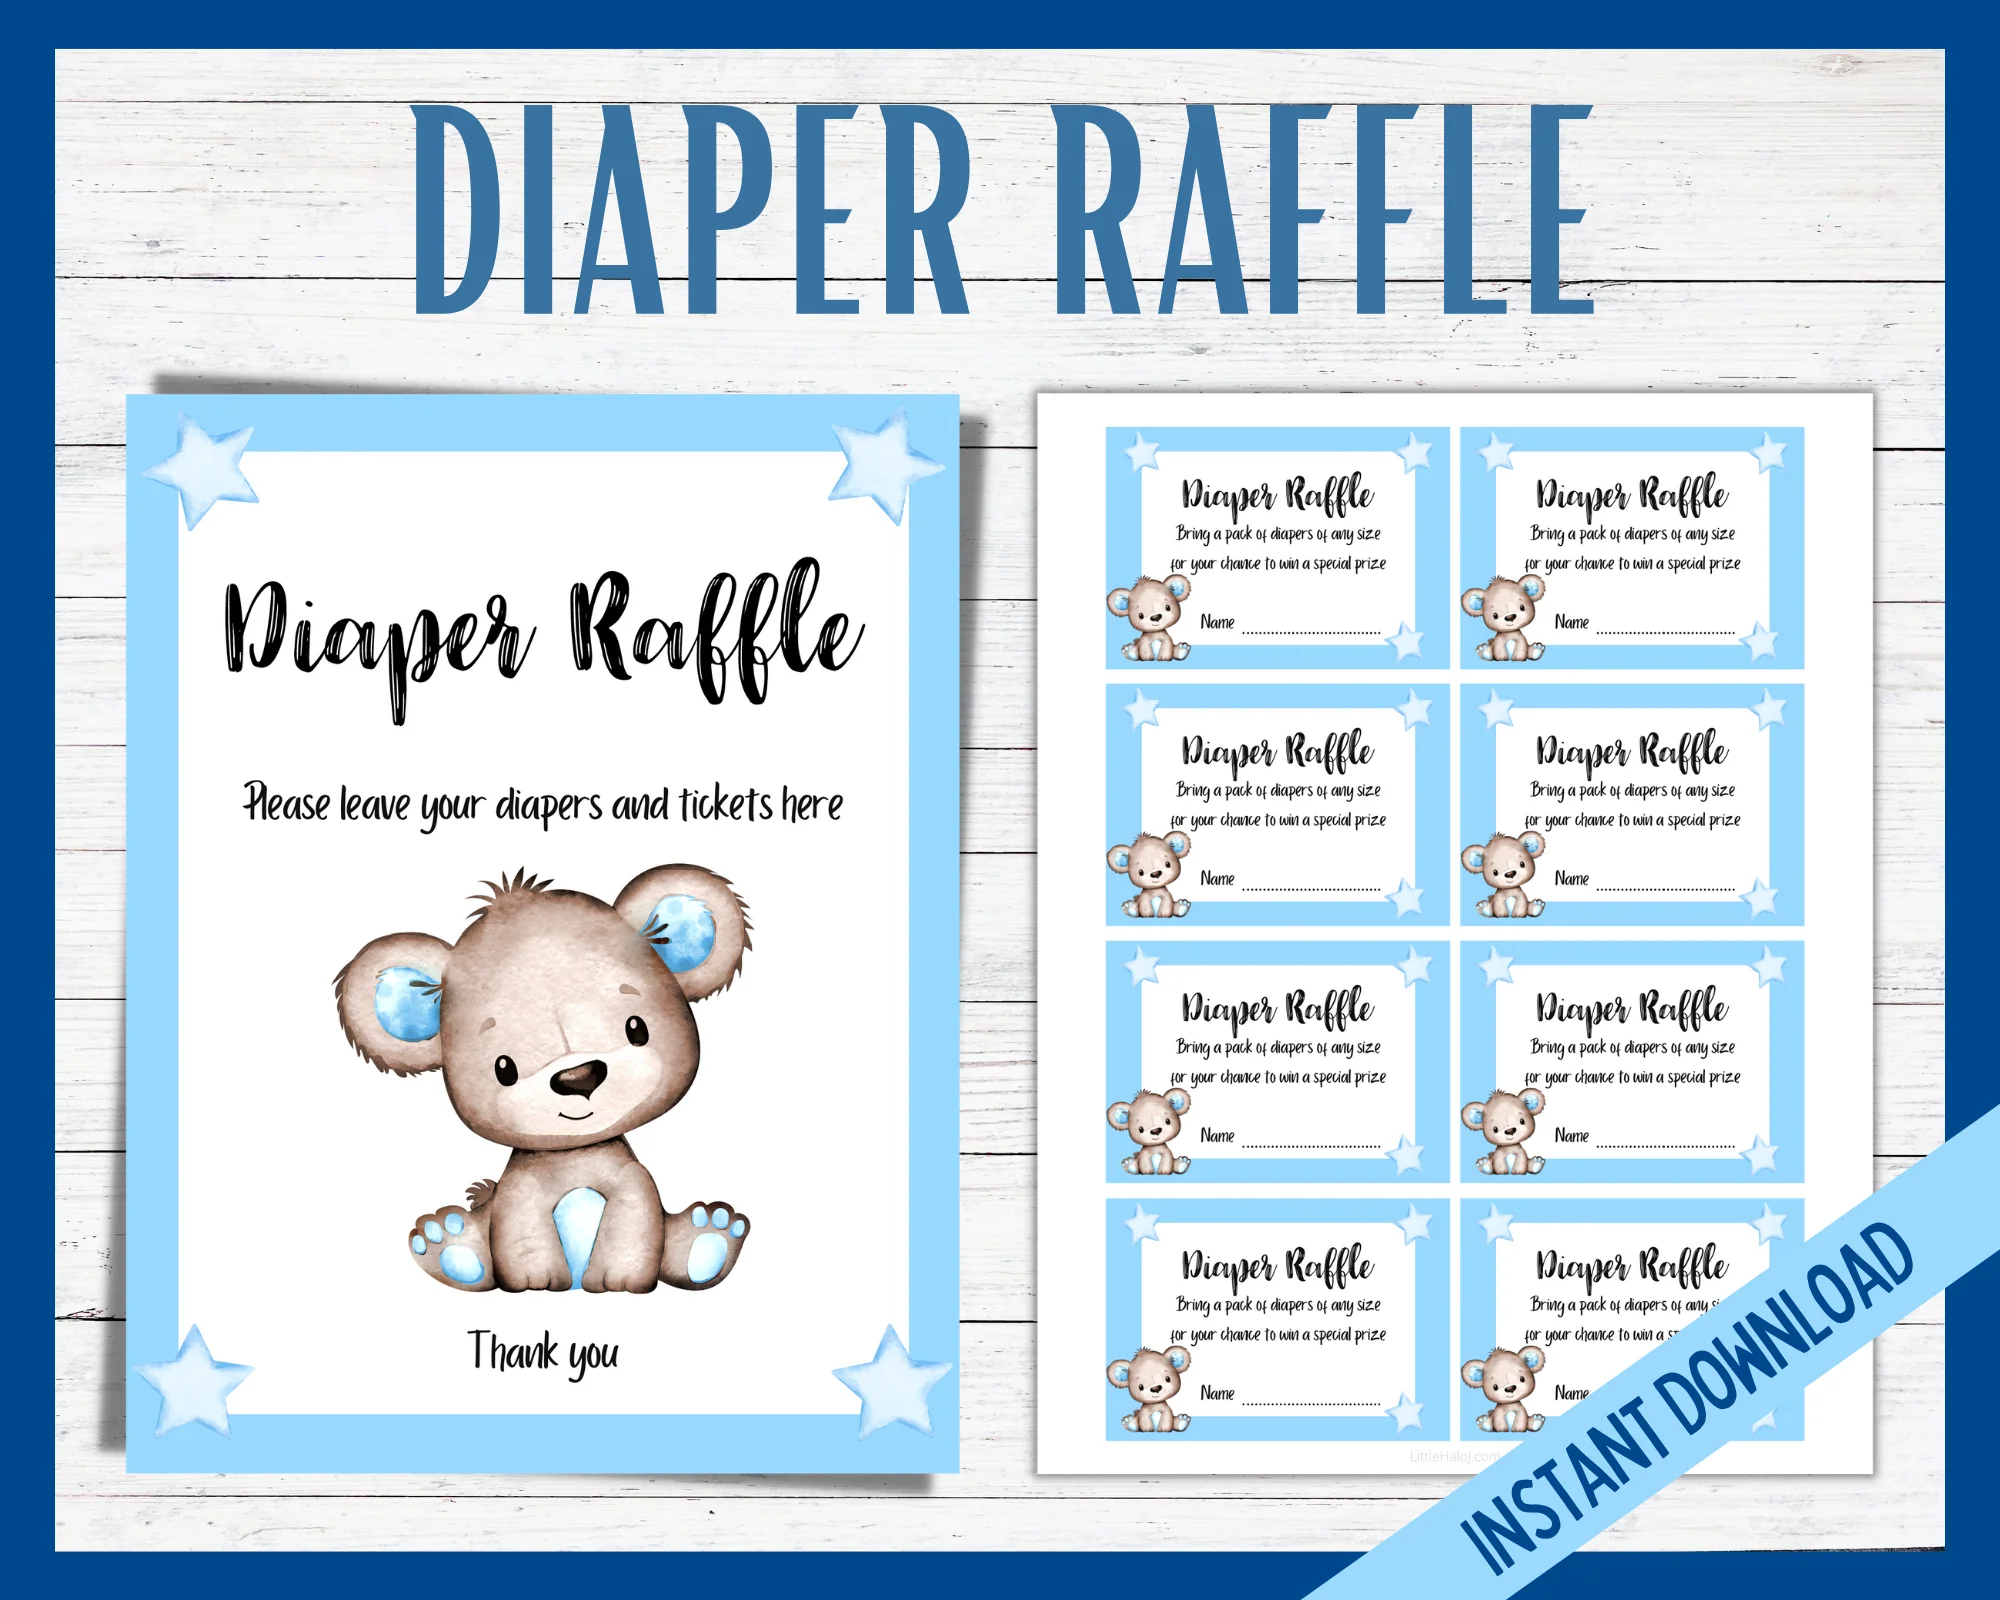 What Is A Diaper Raffle